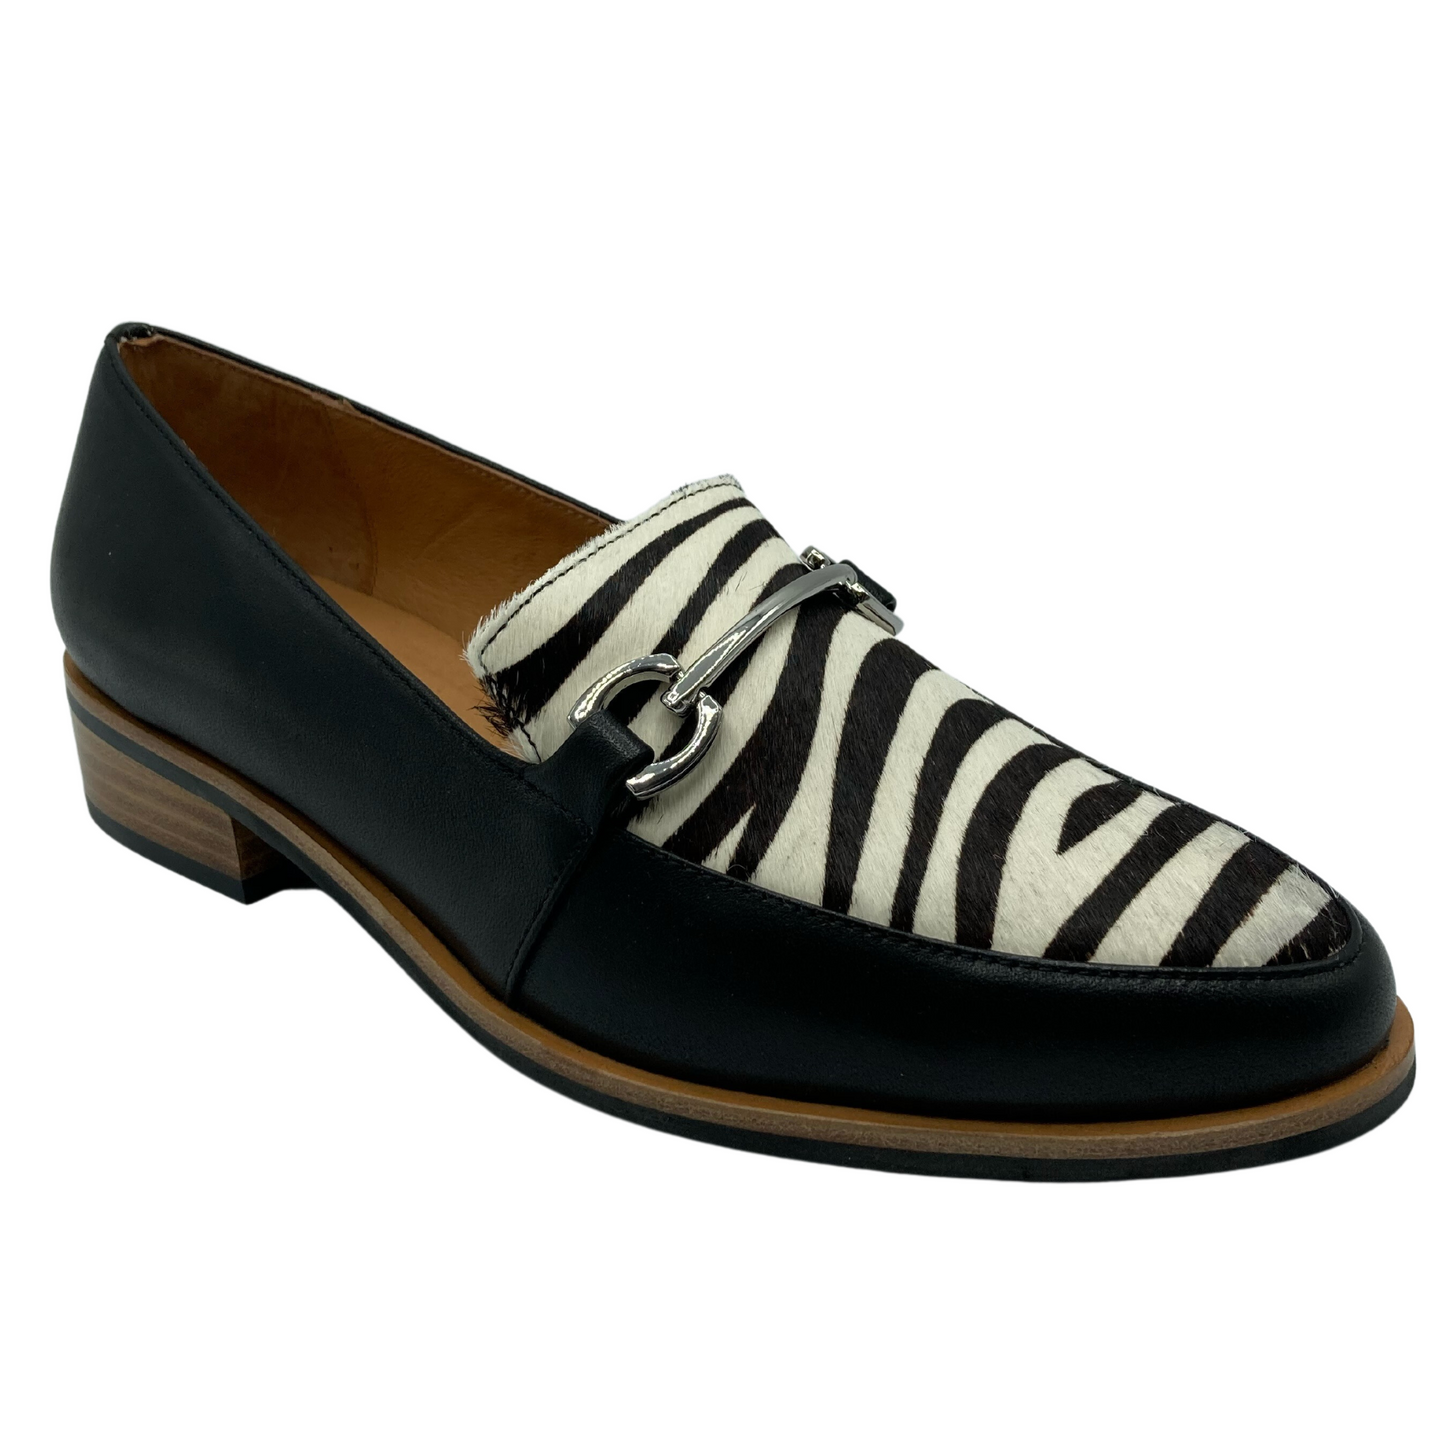 45 degree angled view of black and zebra print loafer with silver buckle detail on upper